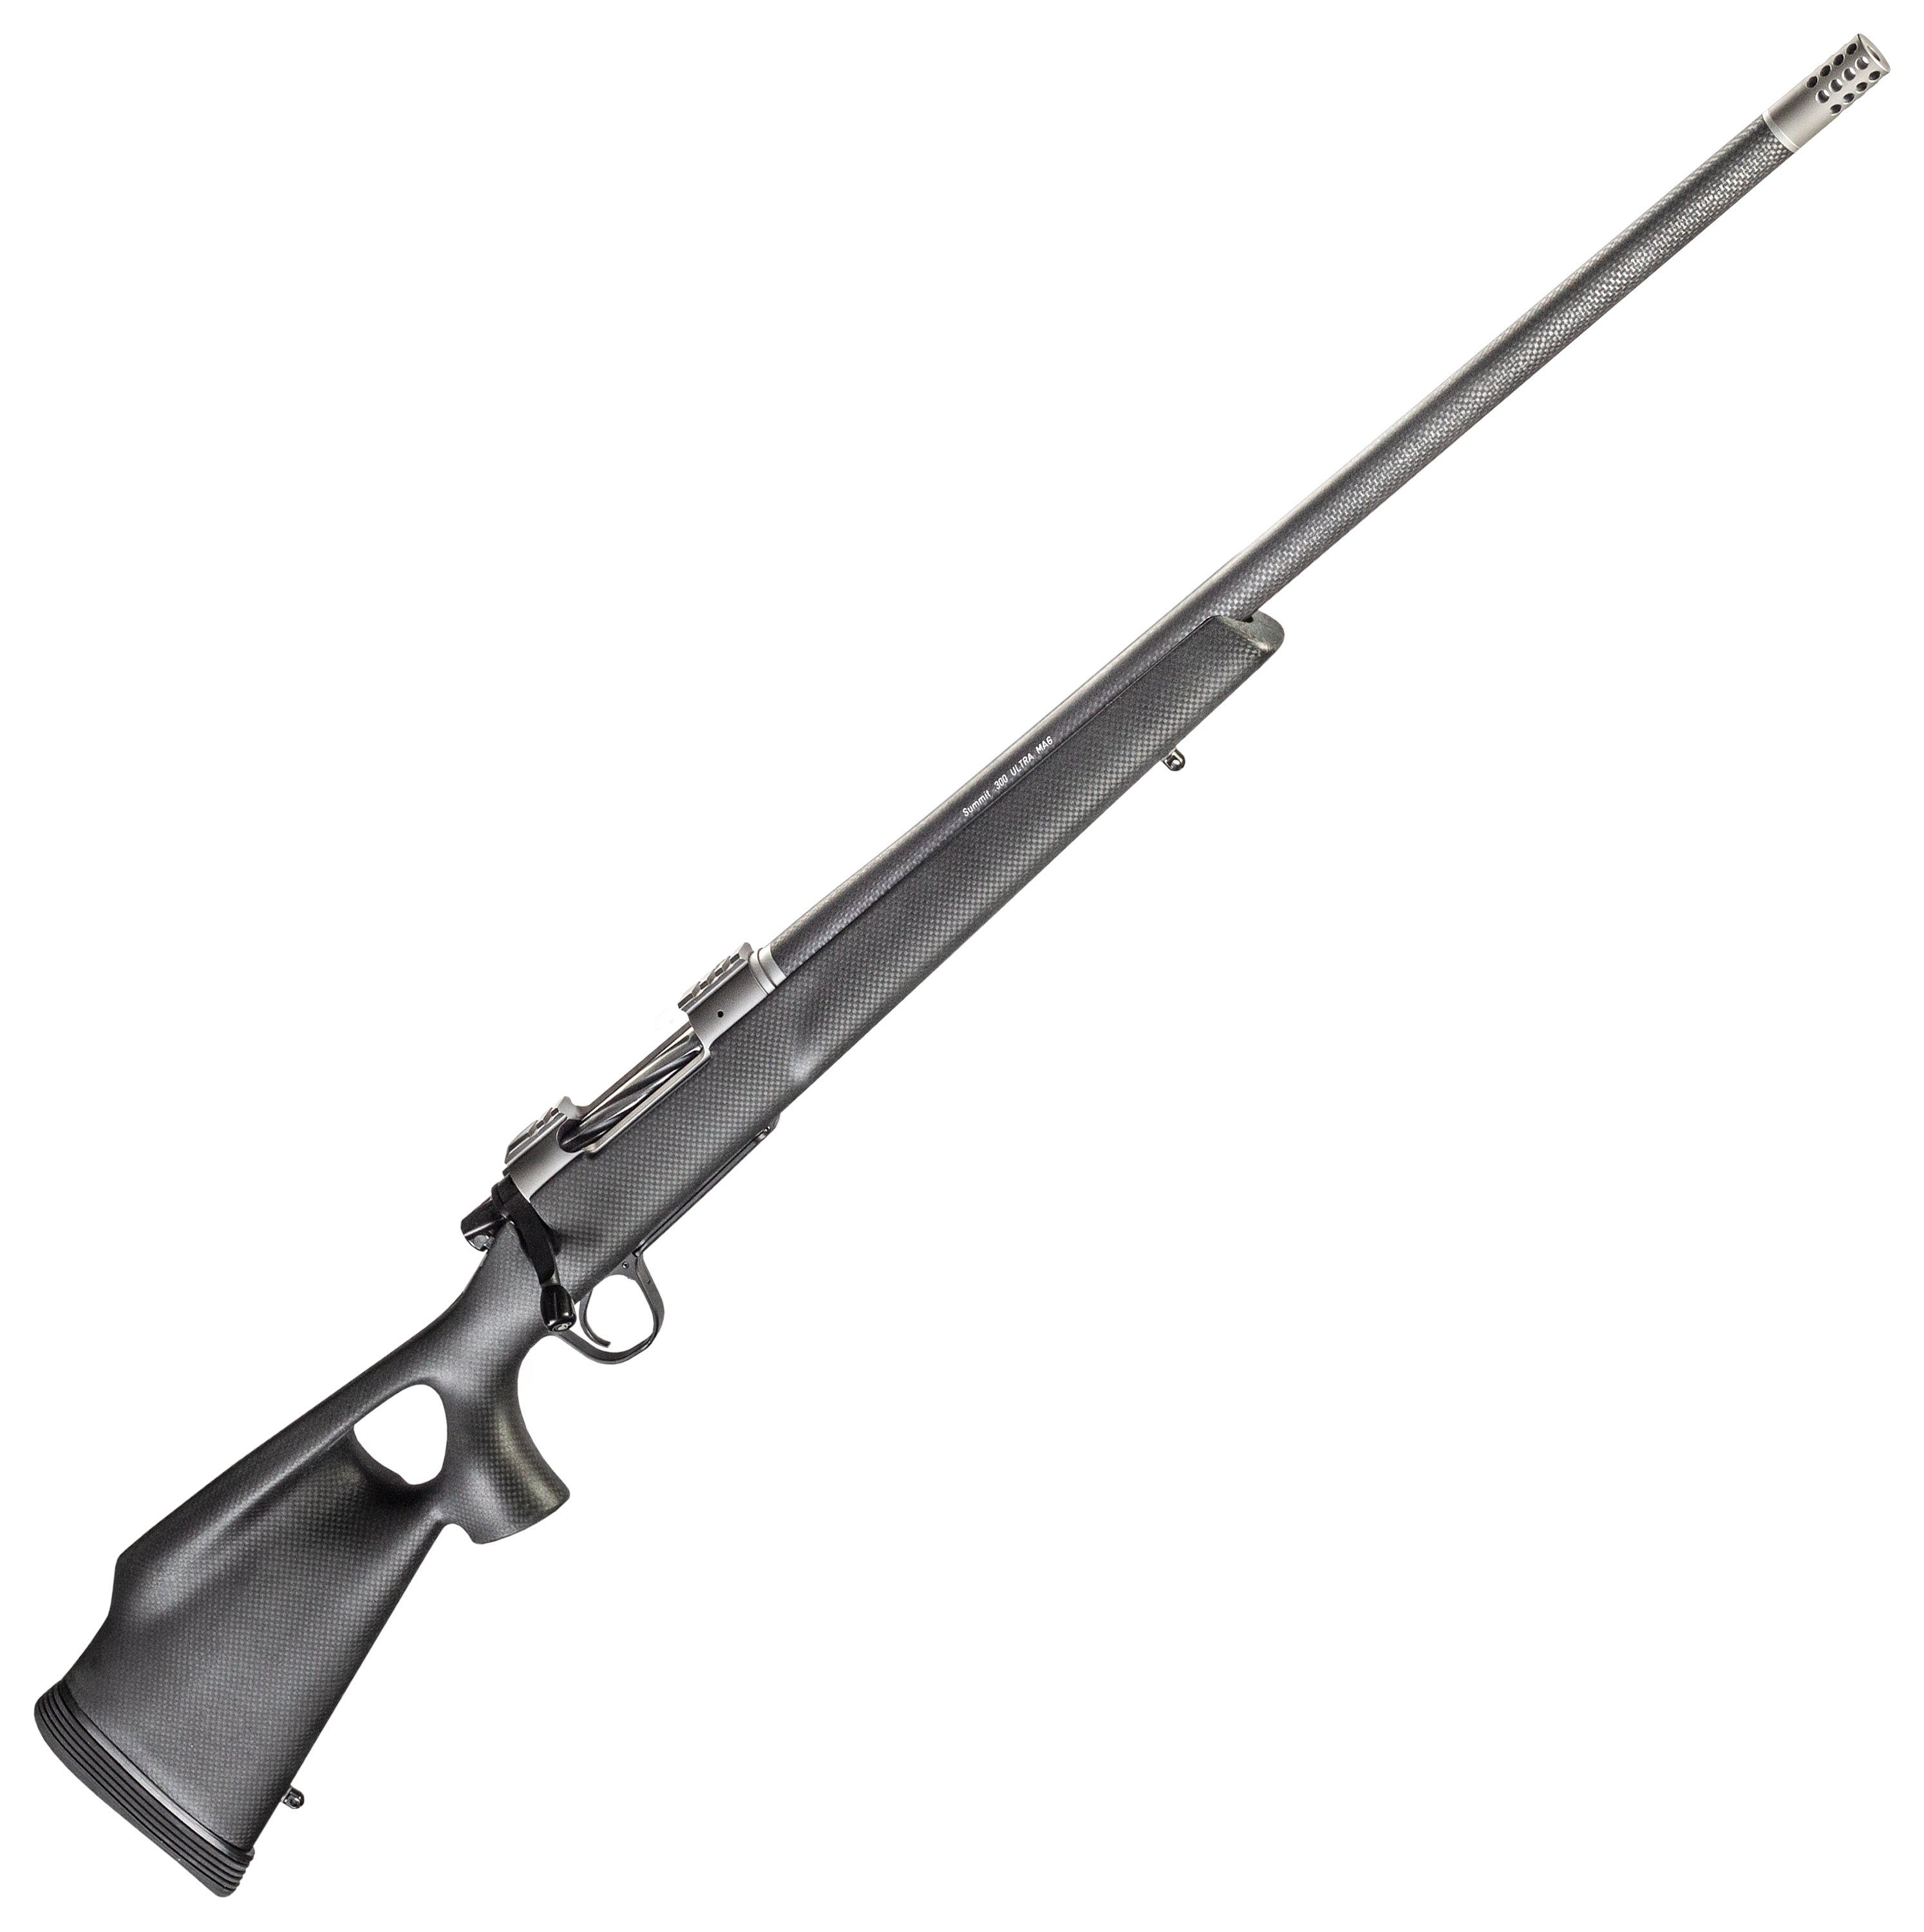 Christensen Arms Summit Ti BoltAction Centerfire Rifle with Thumbhole Stock  7mm Remington Magnum